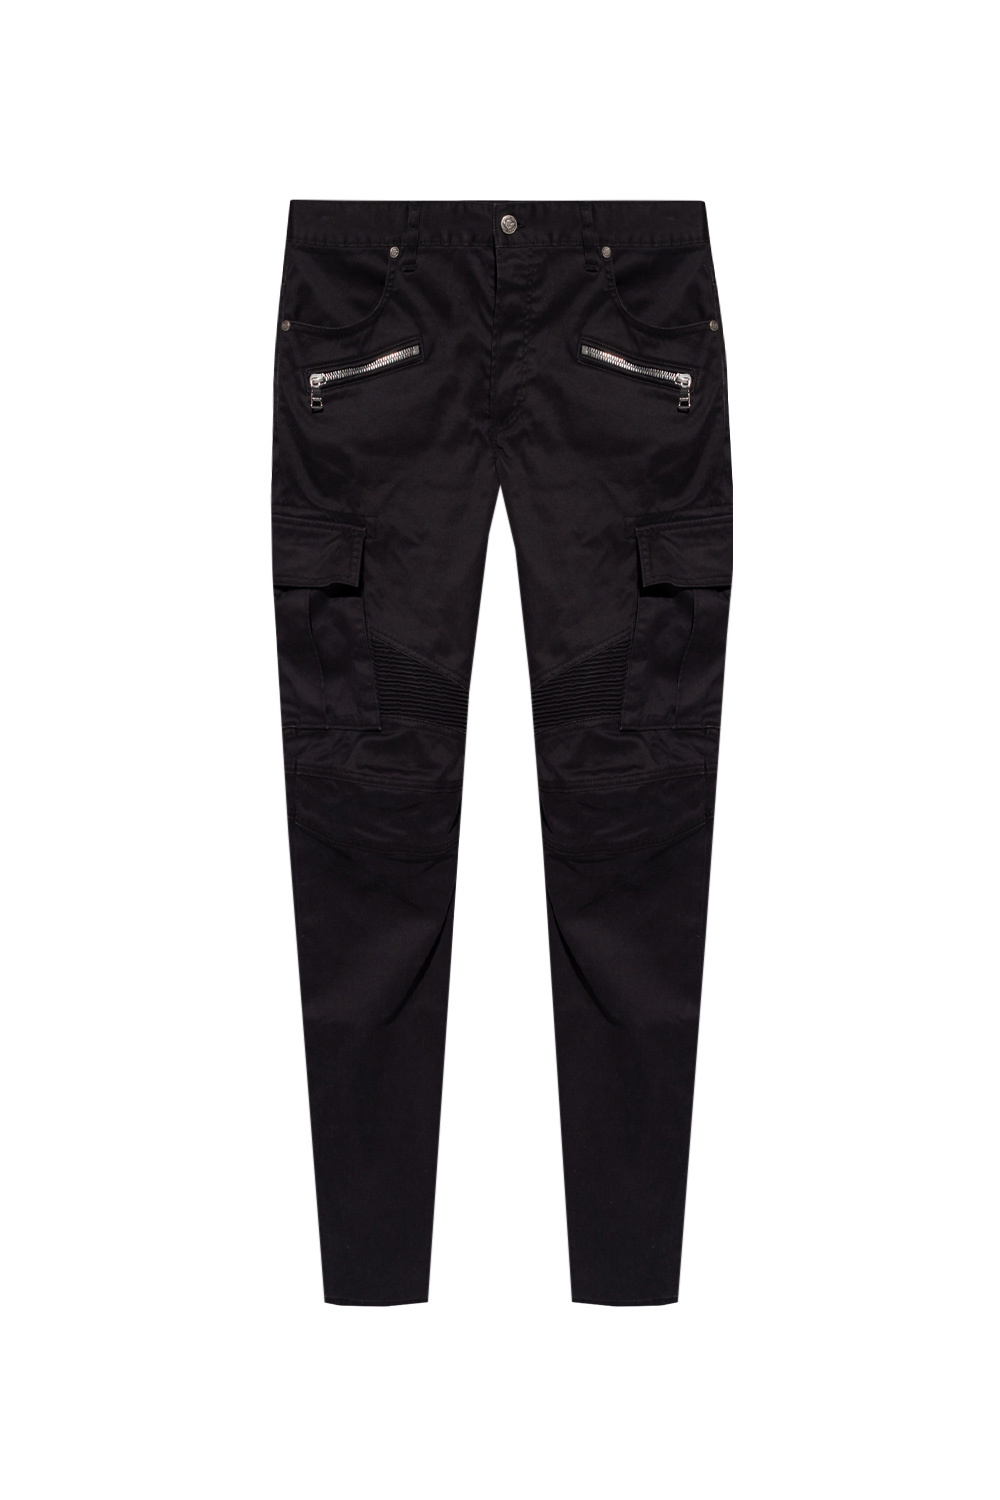 Women's - Loose Fit Pants in Black for Training